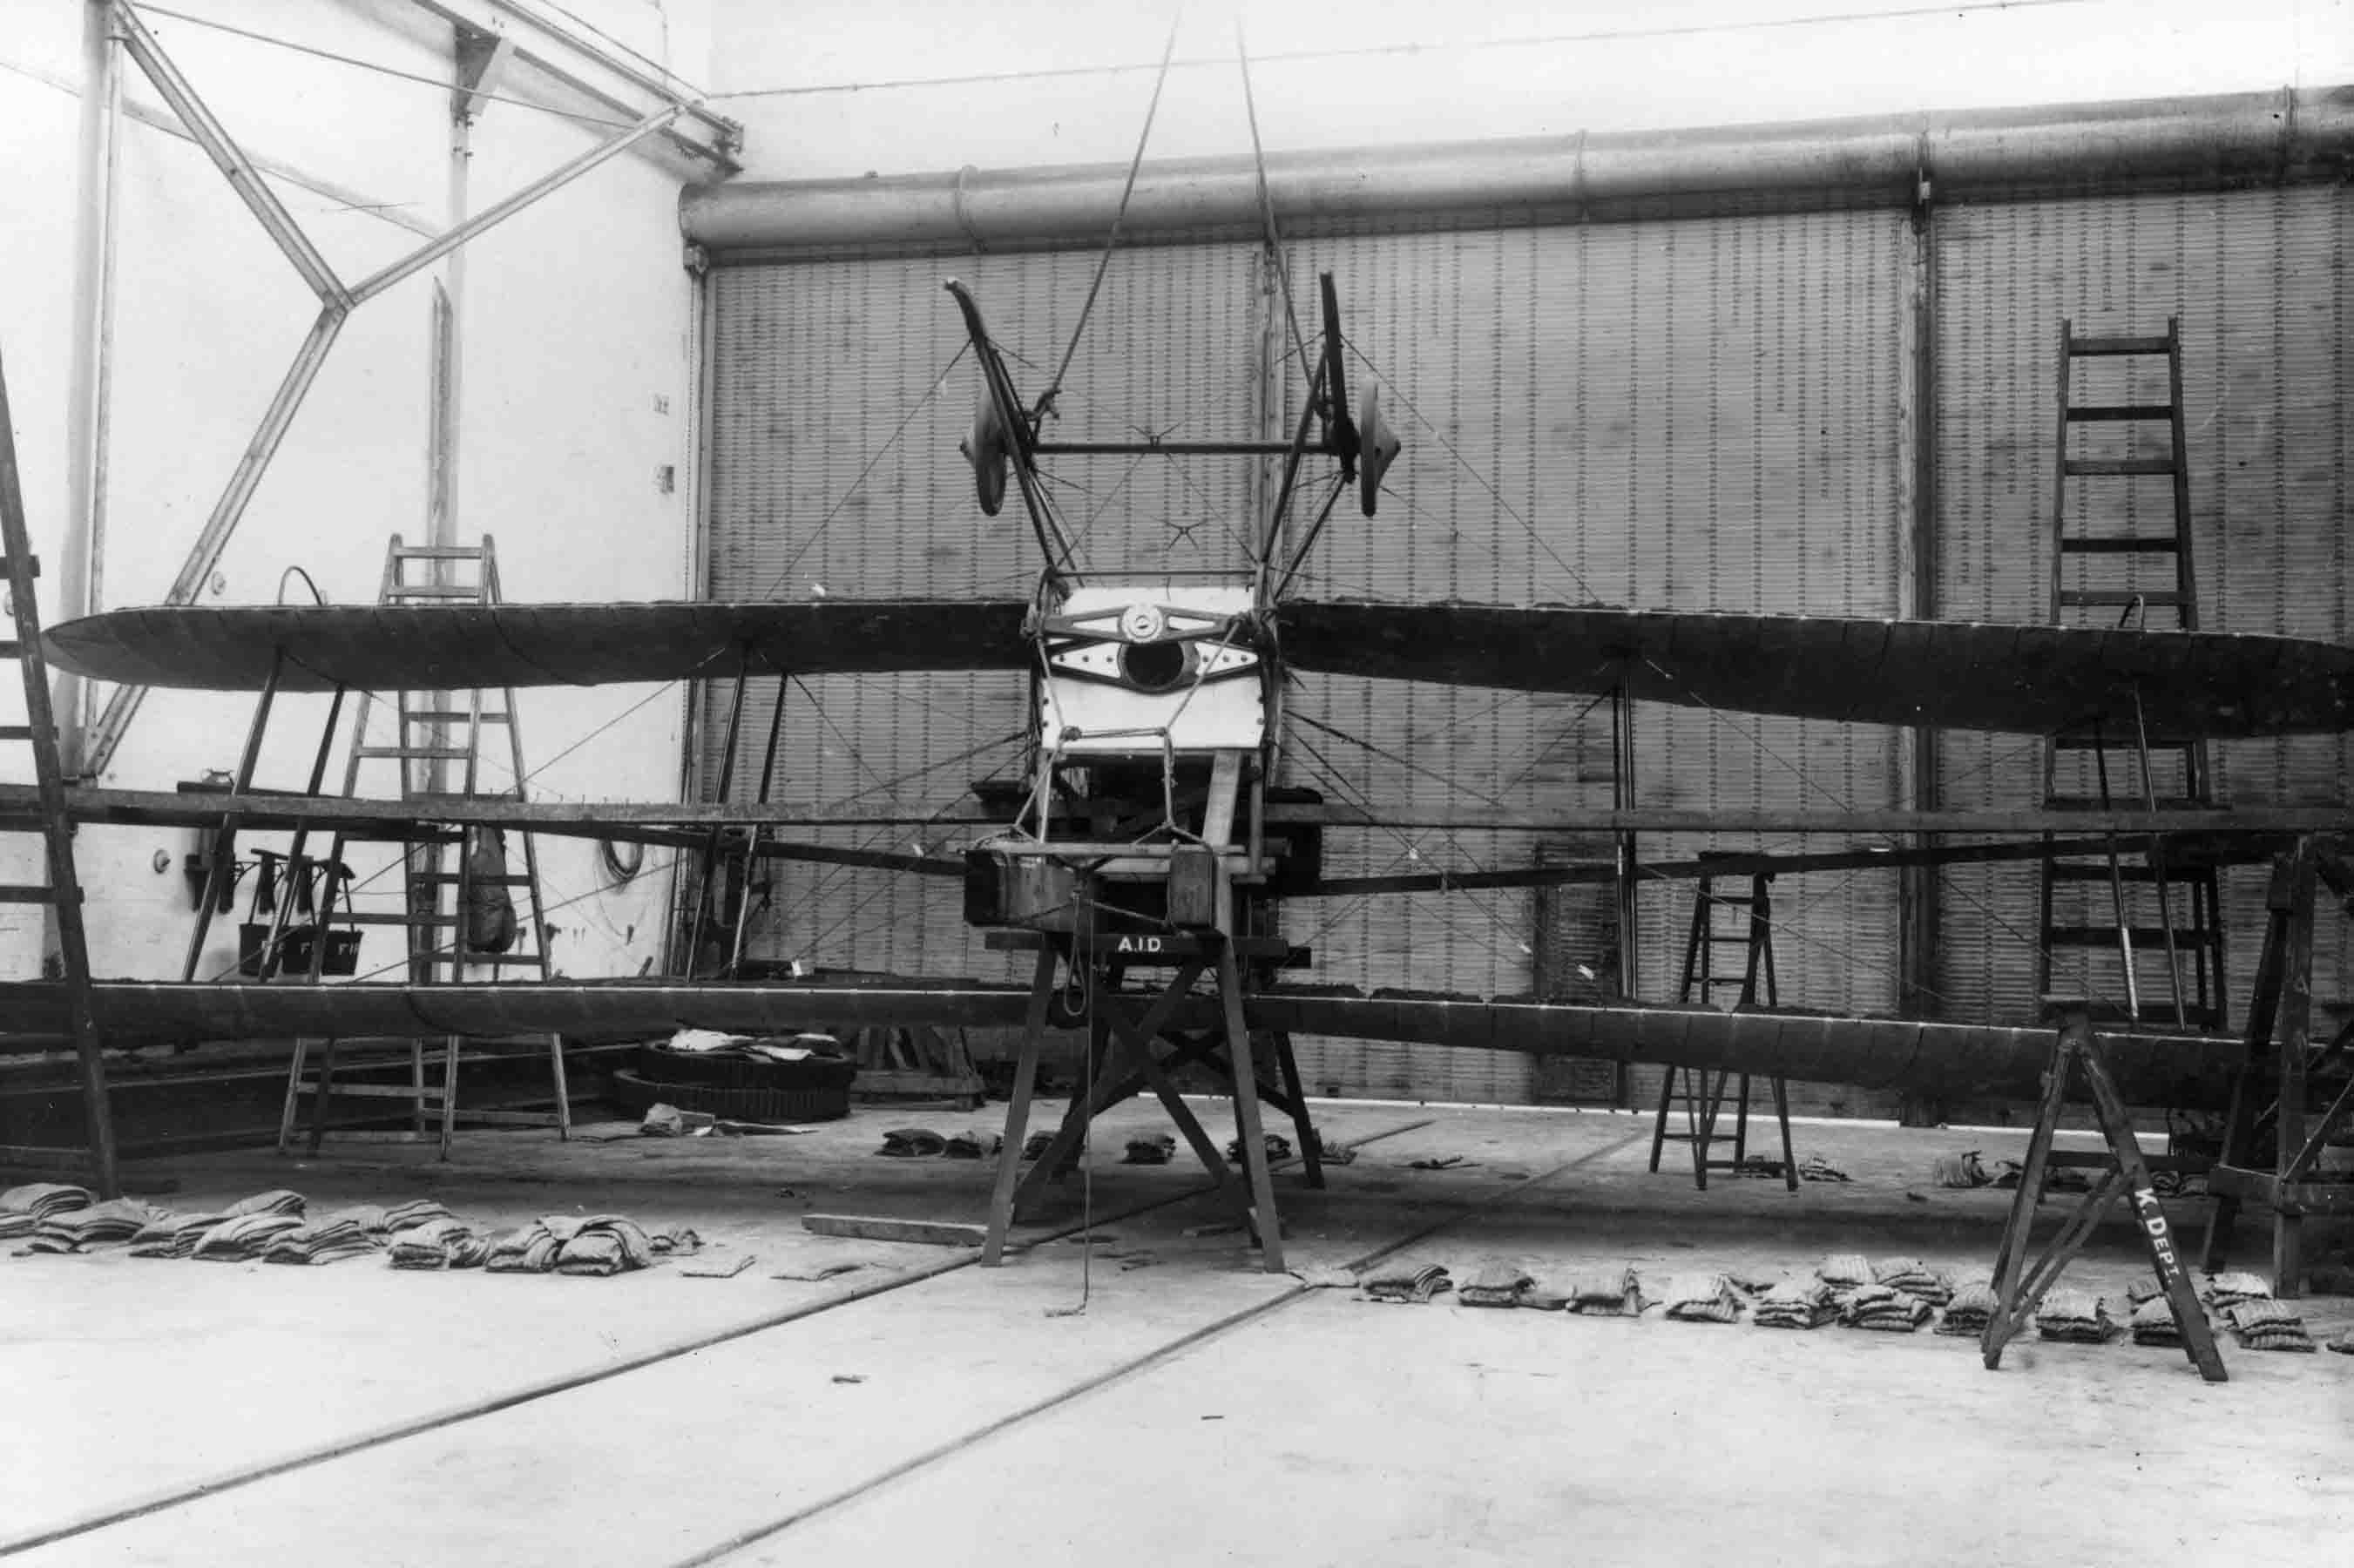 B.E.8 ready for a loading test; note the bags of sand laid out on the floor.